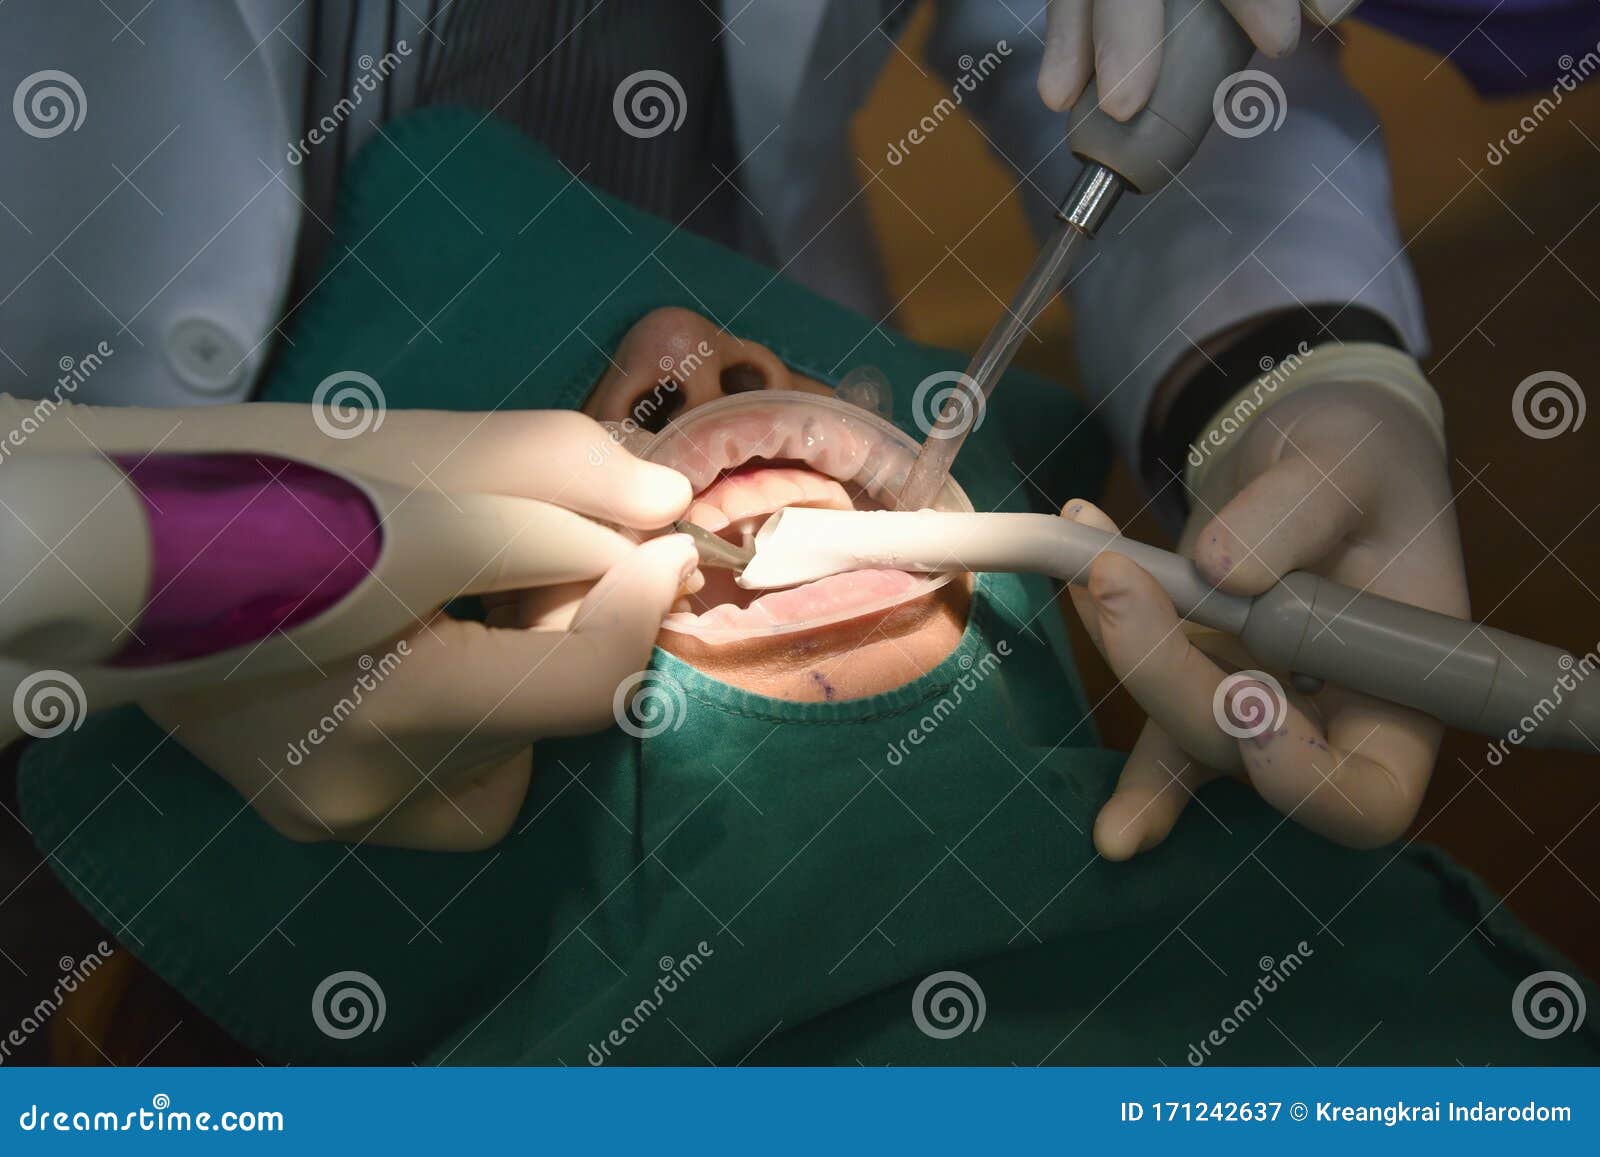 dental care check up, dentist examining and doing teeth treatment in dental clinic, yearly visit for teeth cleaning.